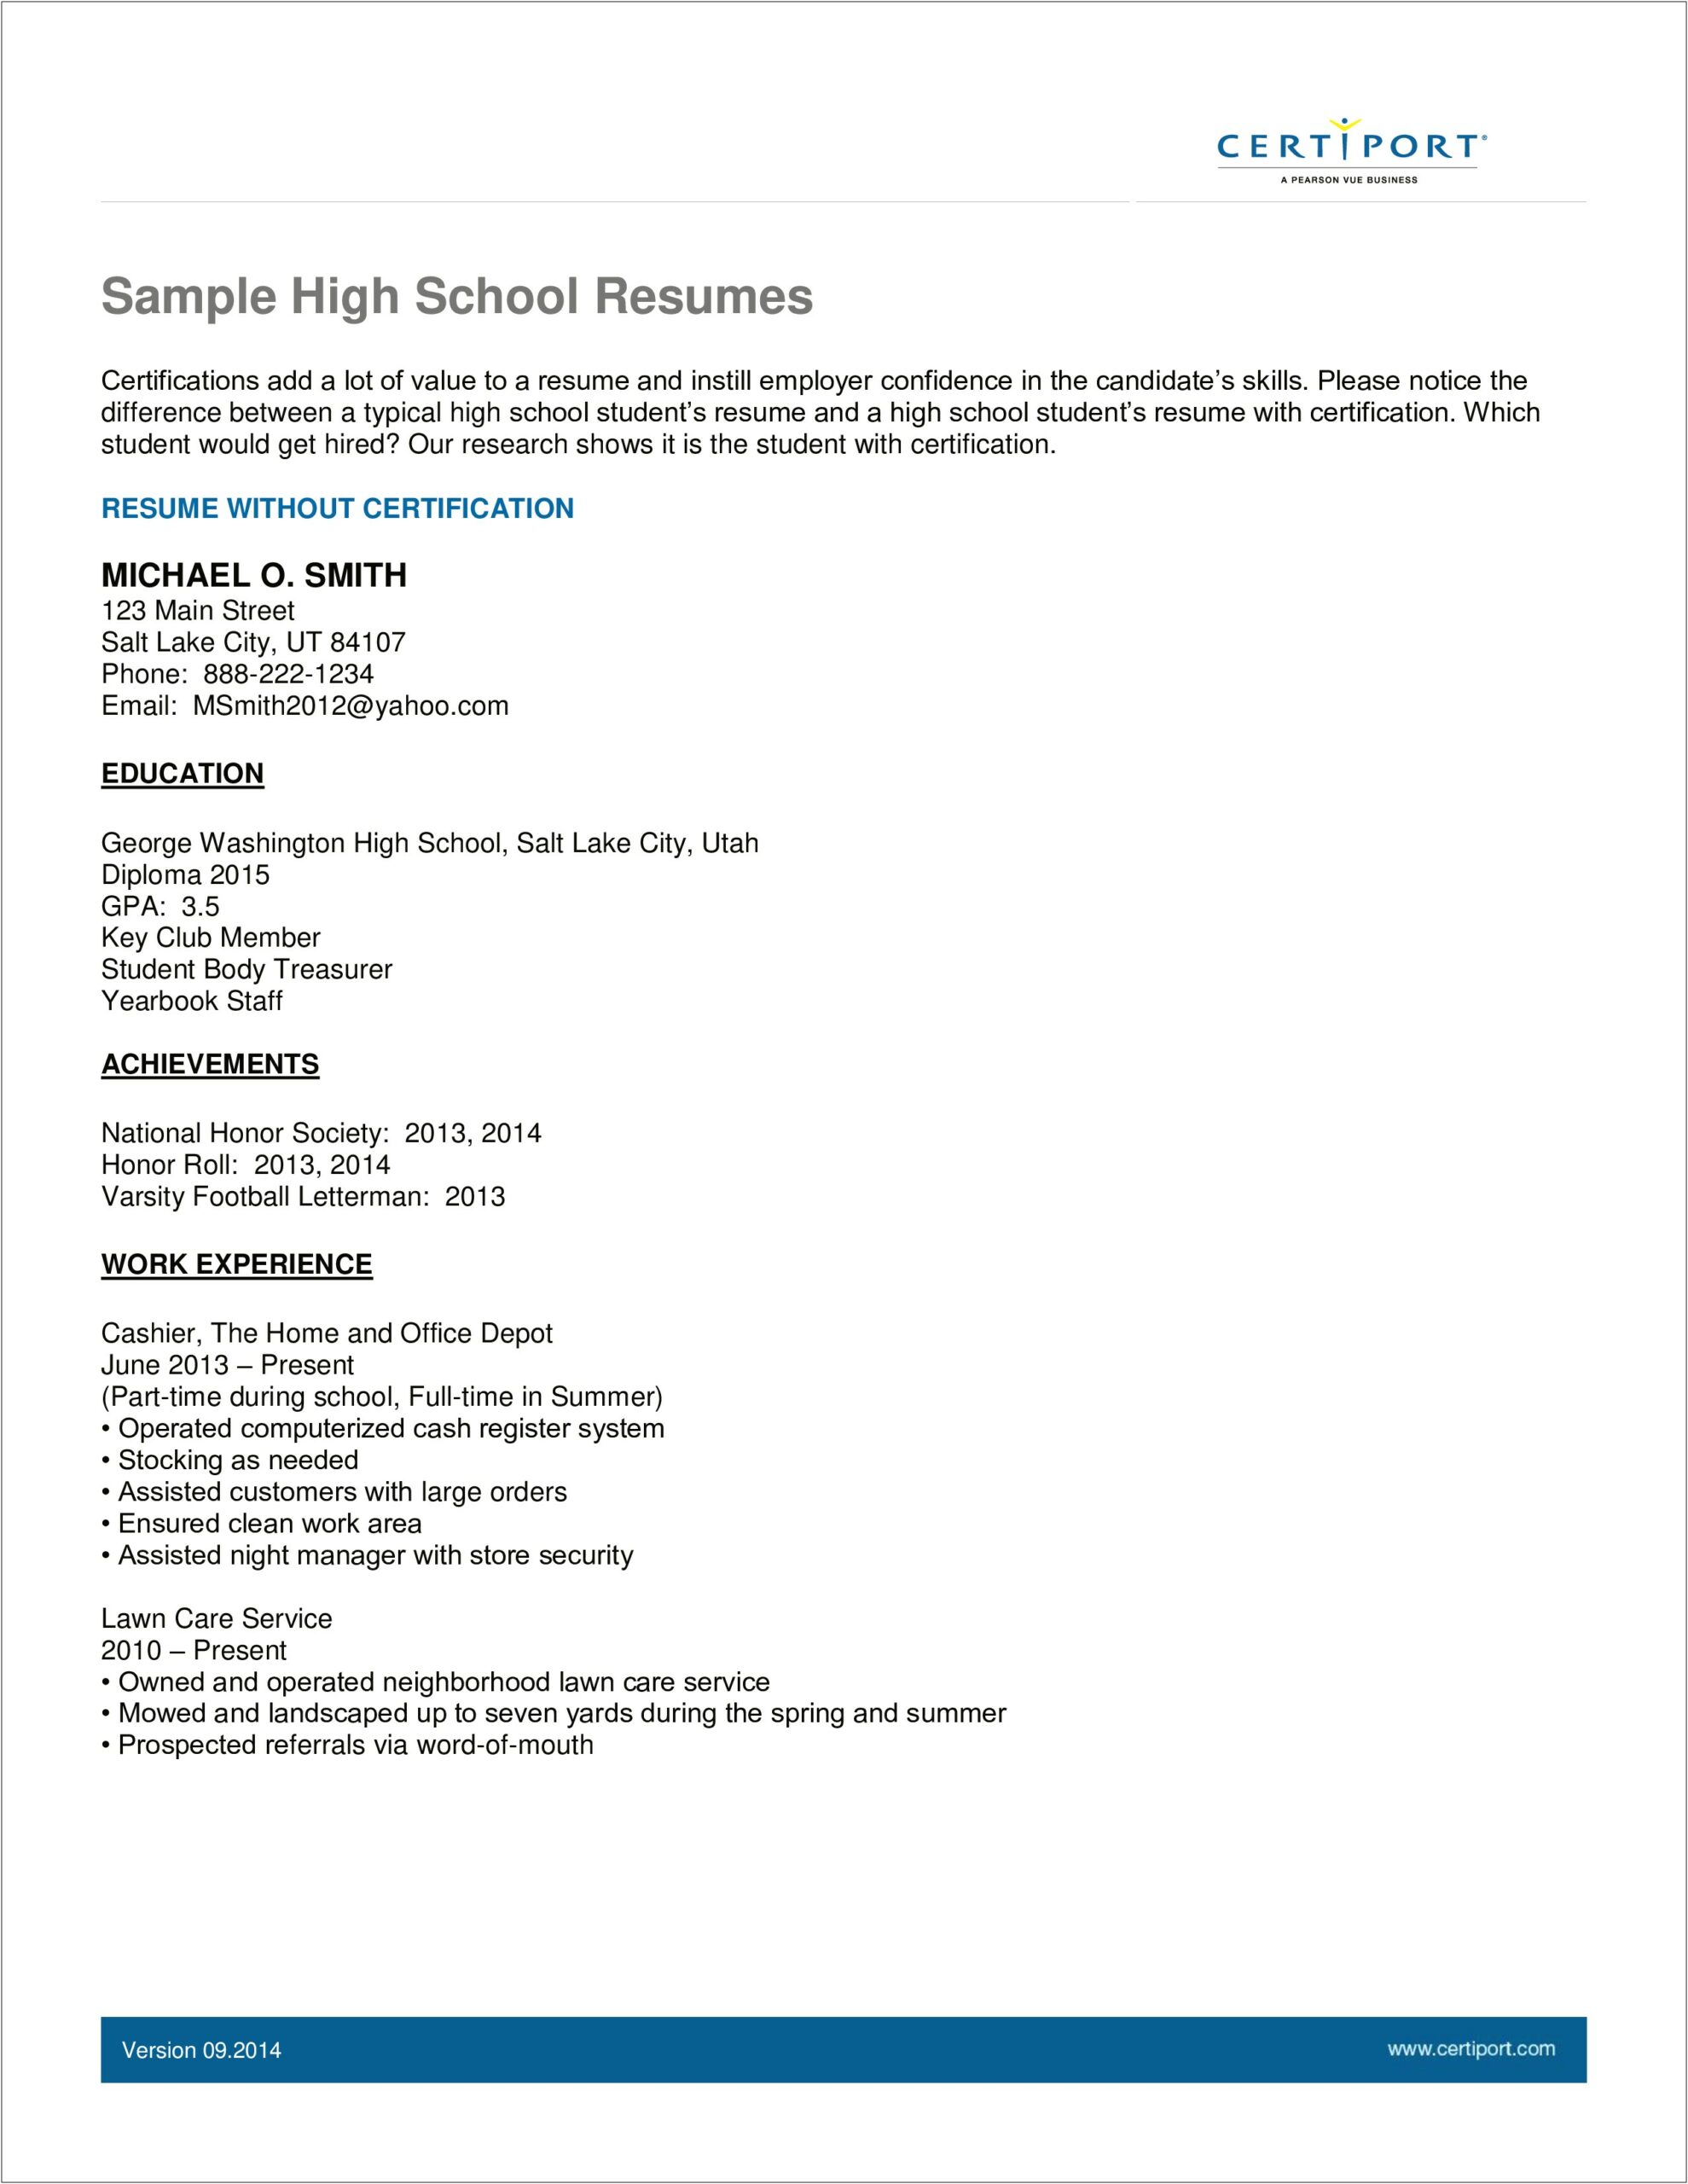 An Example Resume For High School Student